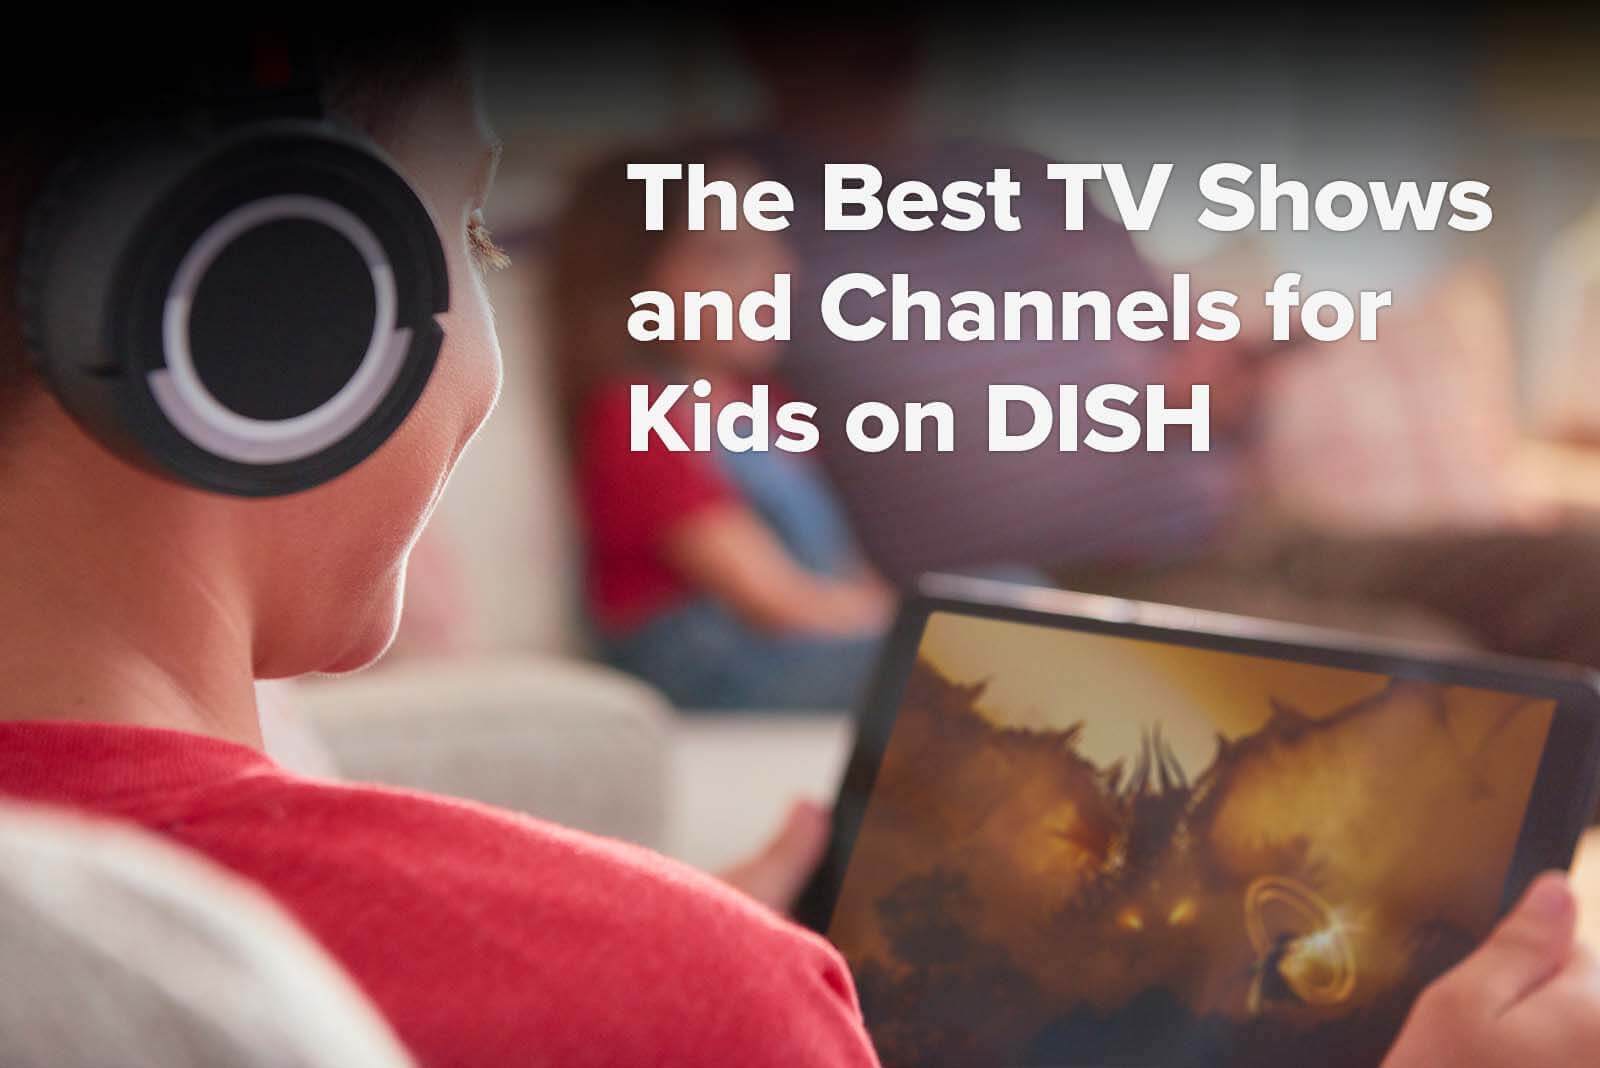 The Best TV Shows and Channels for Kids on DISH